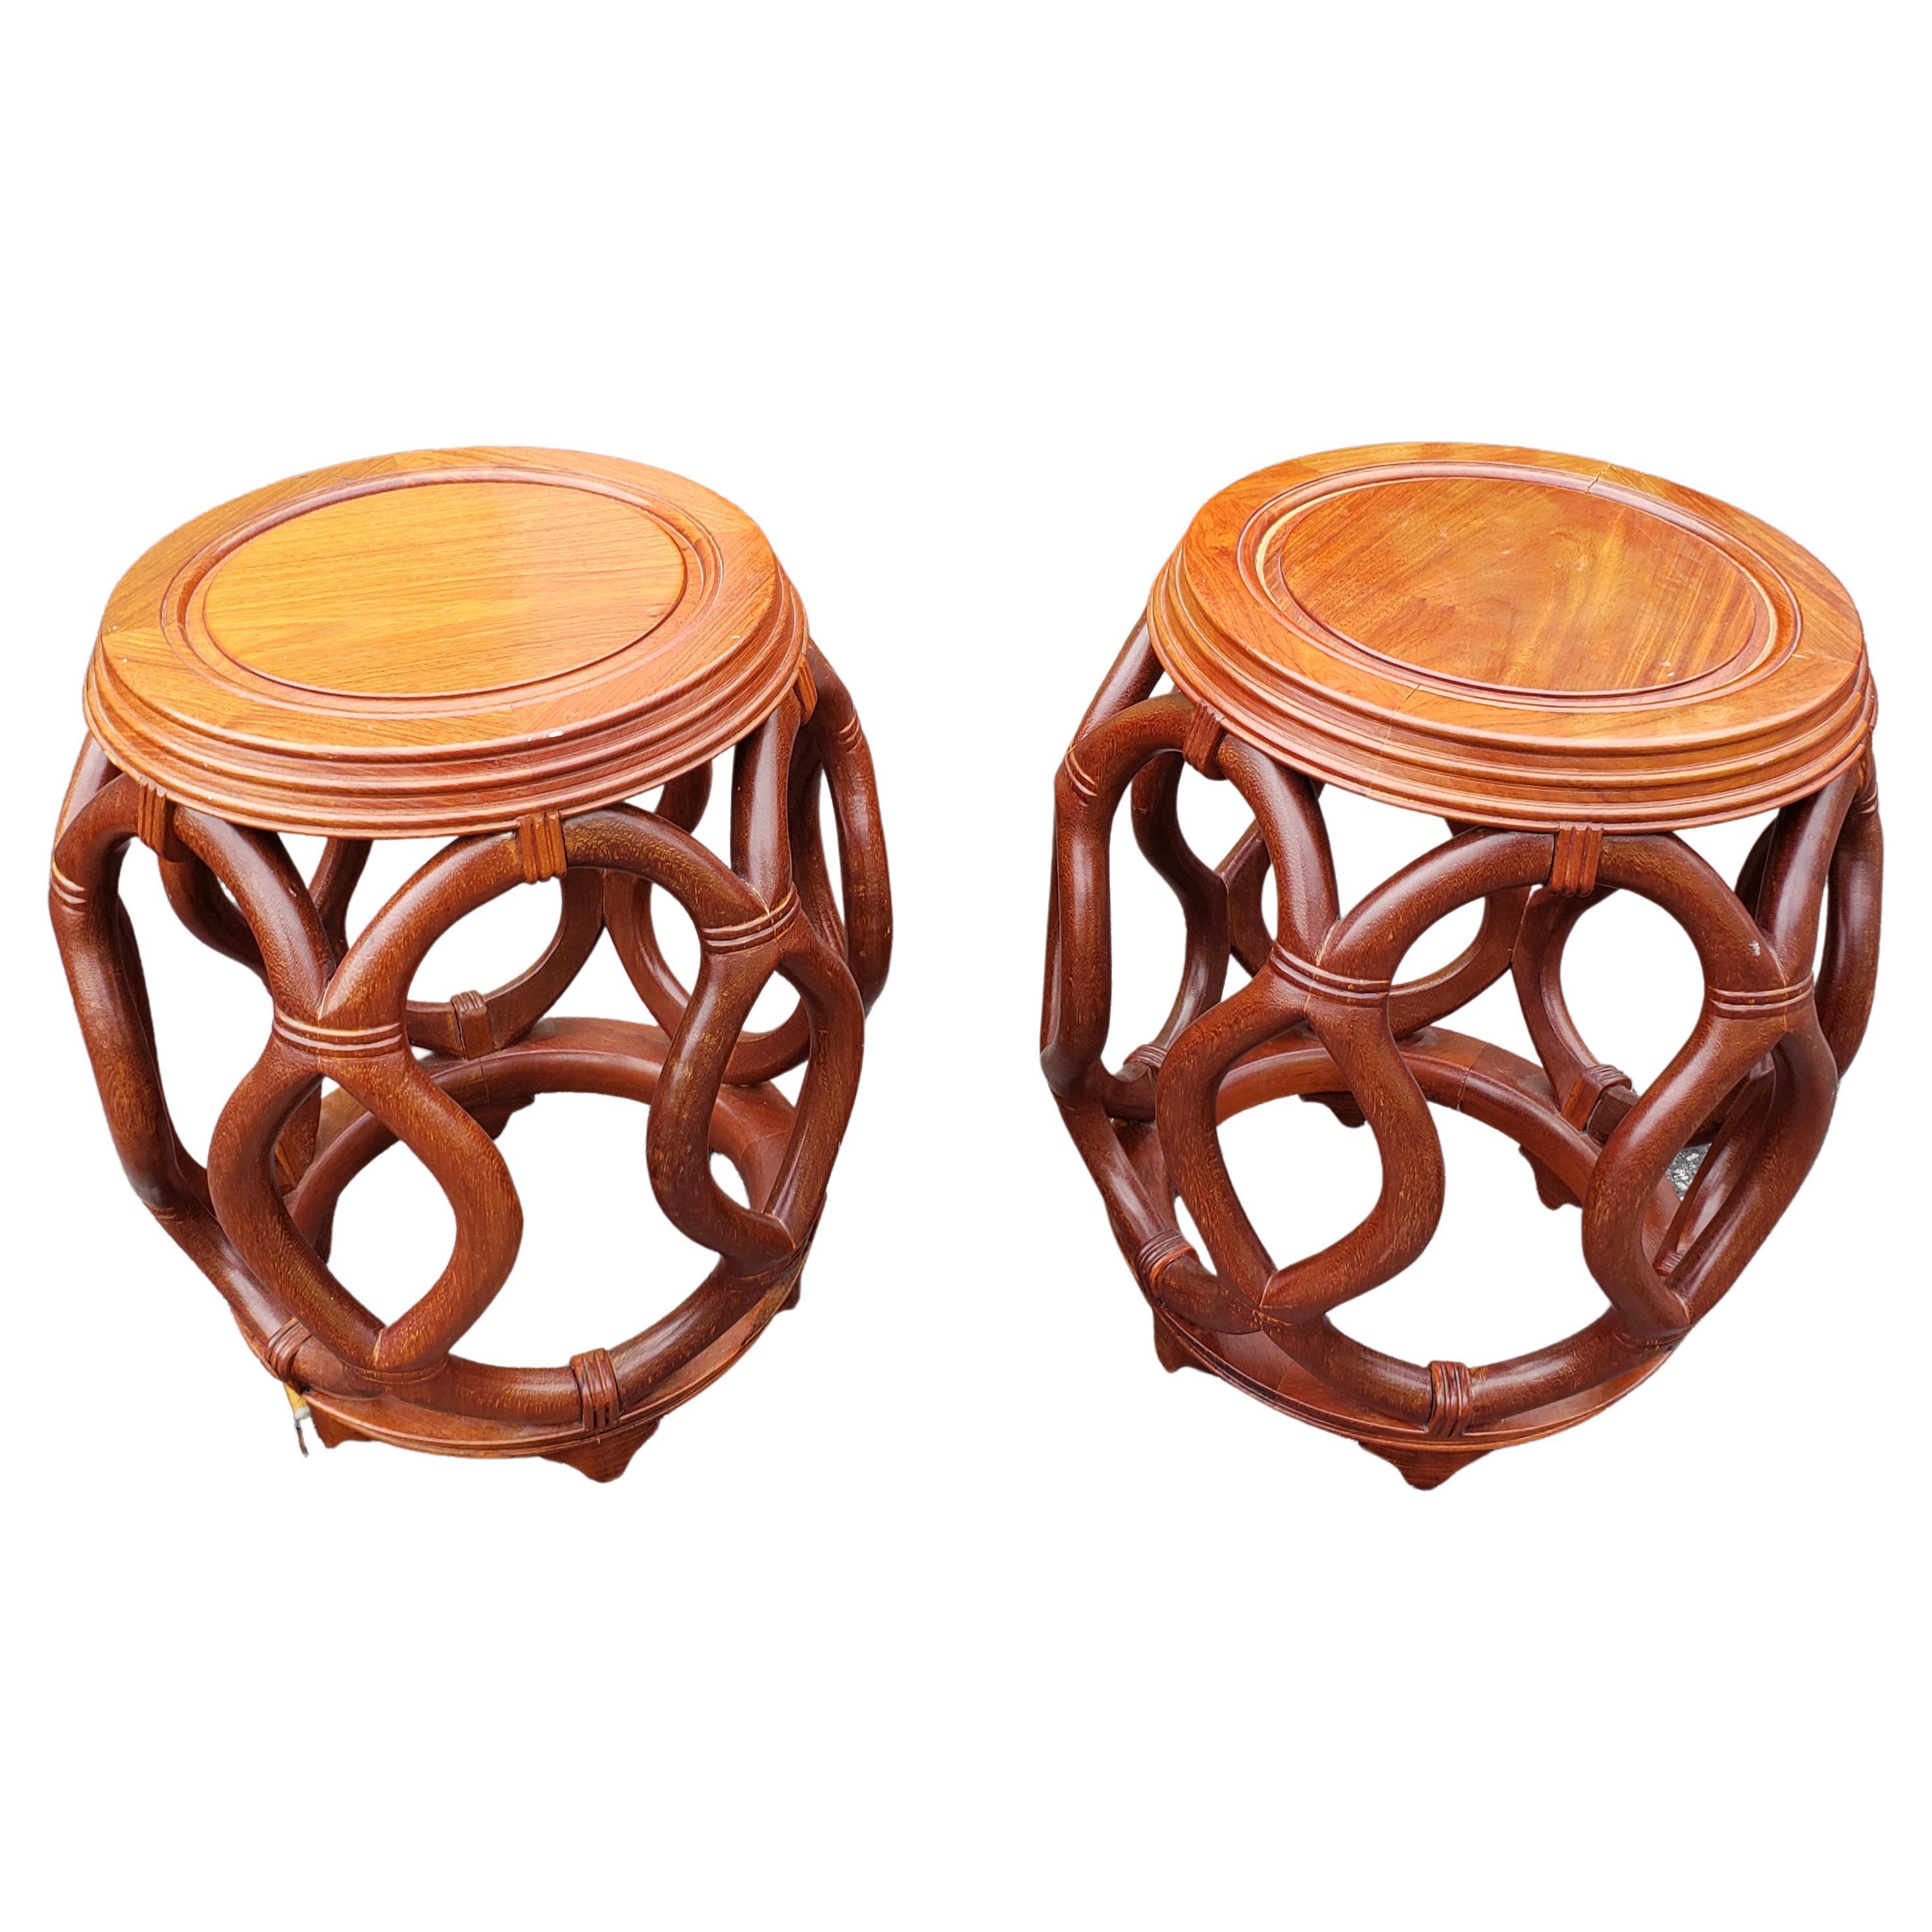 Pair of Chinese Solid Rosewood Faux Rattan Garden Style Stools or Side Tables In Good Condition For Sale In Germantown, MD